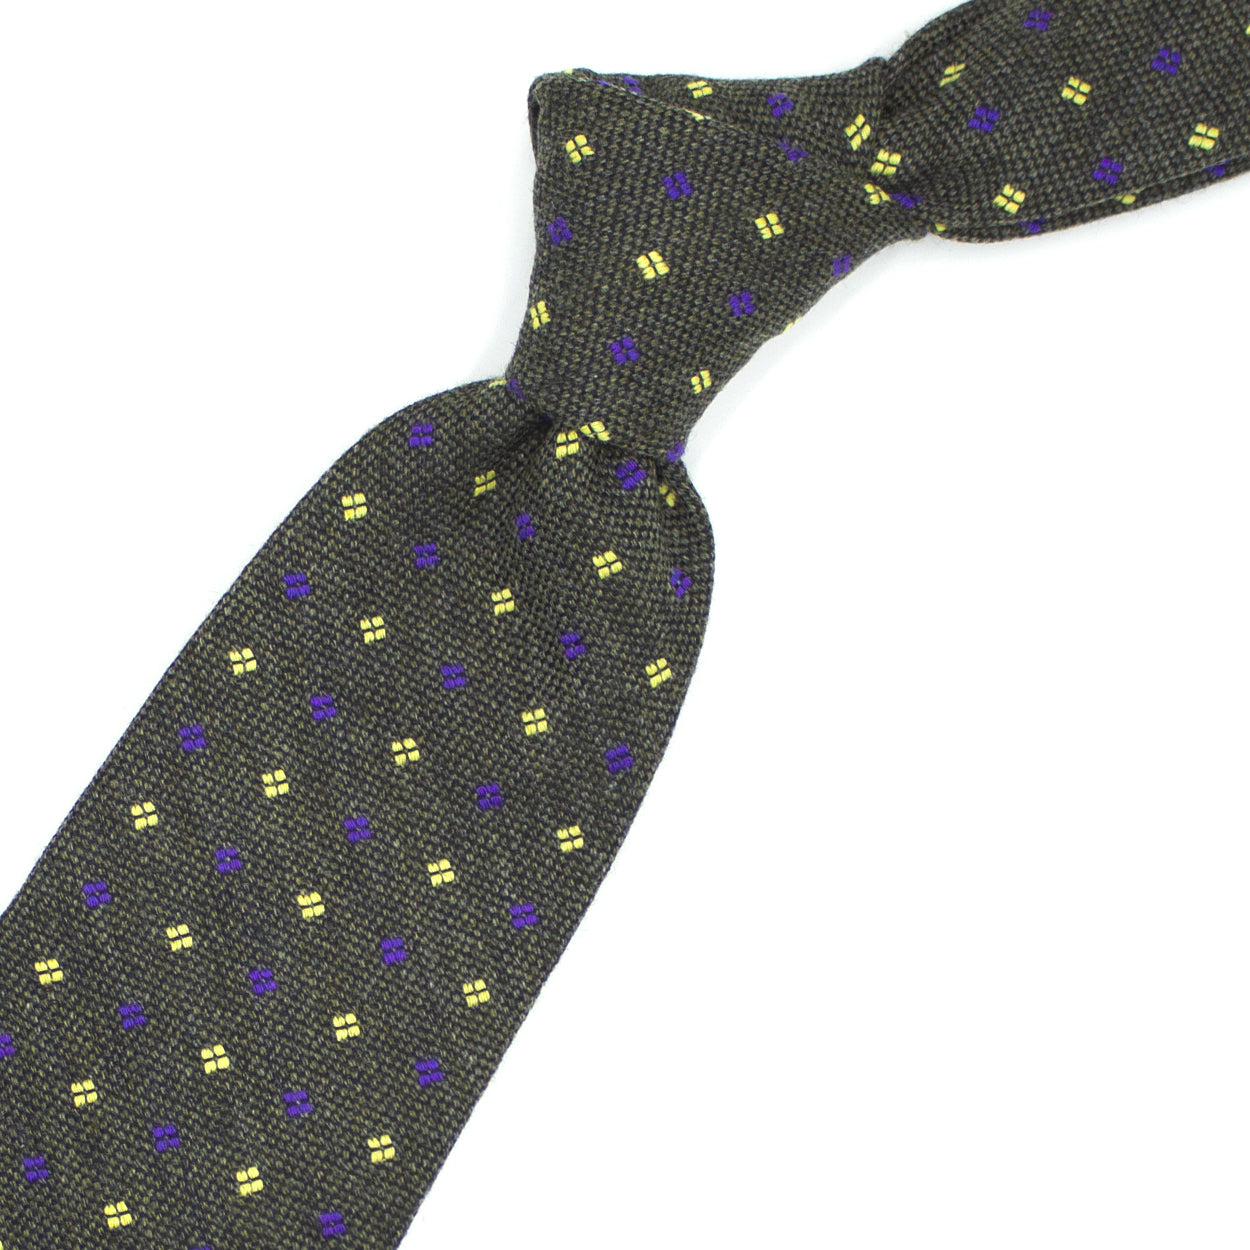 Moss green tie with purple and yellow squares